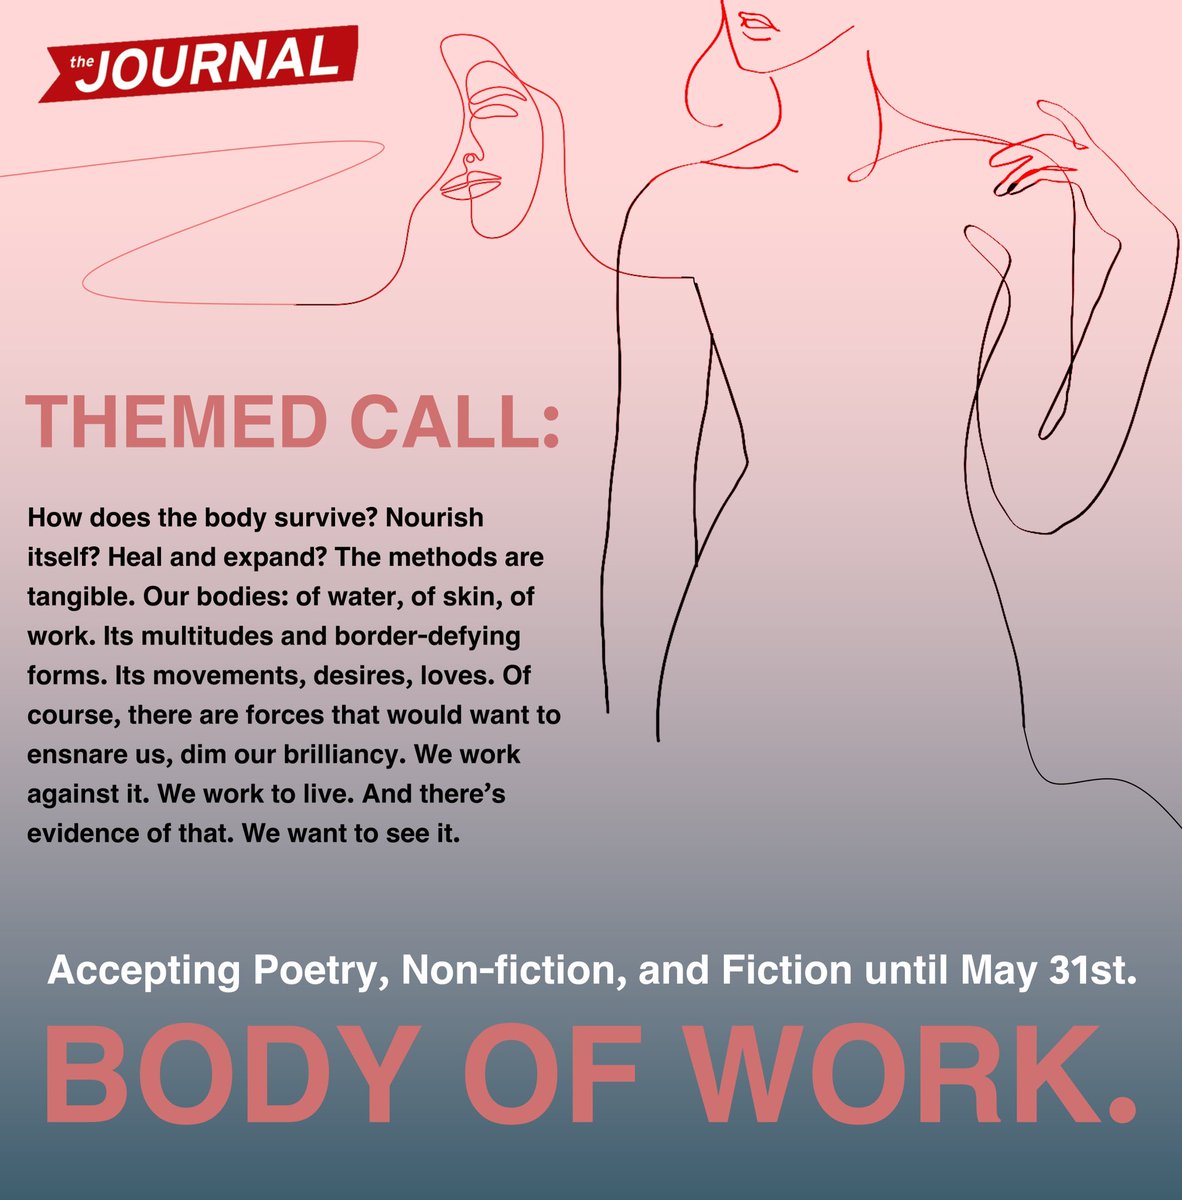 SUBMISSIONS OPEN for our themed issue until 5/31! This issue explores the body as a site of memory. We are interested in how, over time, our flesh becomes a recollection of triumph and trauma. Submit at thejournal.submittable.com/submit or follow the link in our bio.